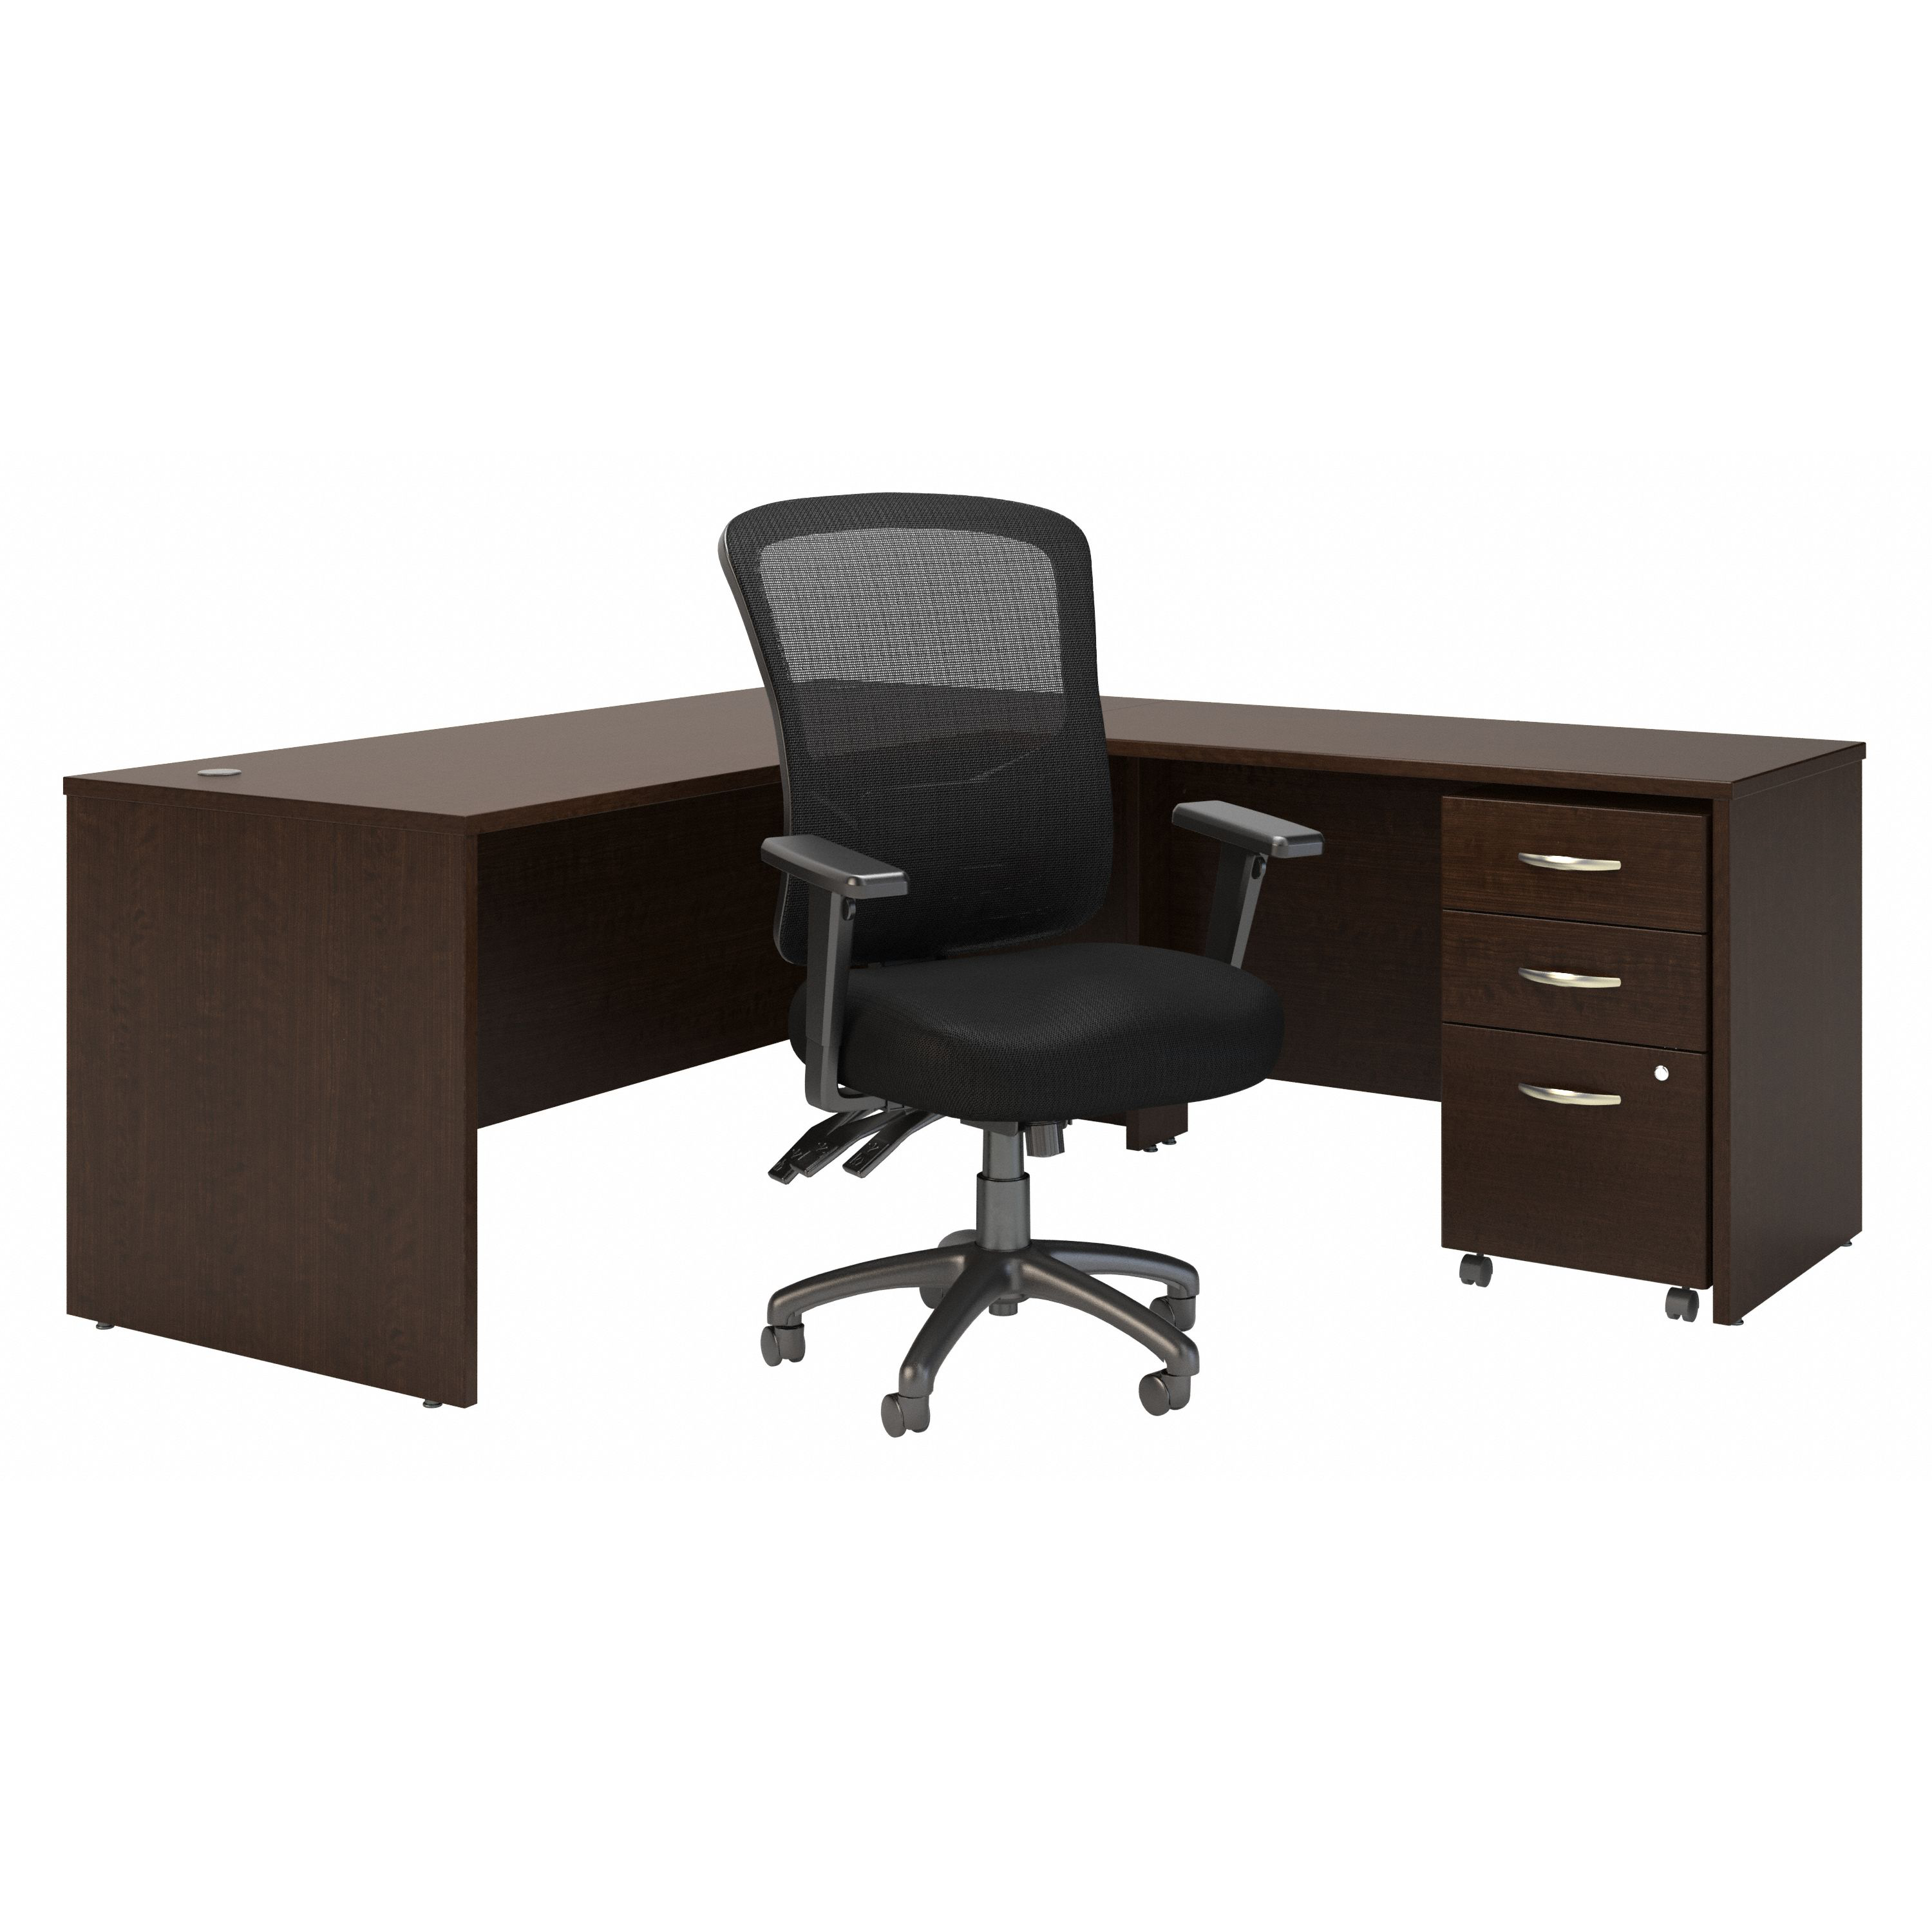 Shop Bush Business Furniture Series C 72W L Shaped Desk with Mobile File Cabinet and High Back Multifunction Office Chair 02 SRC131MRSU #color_mocha cherry